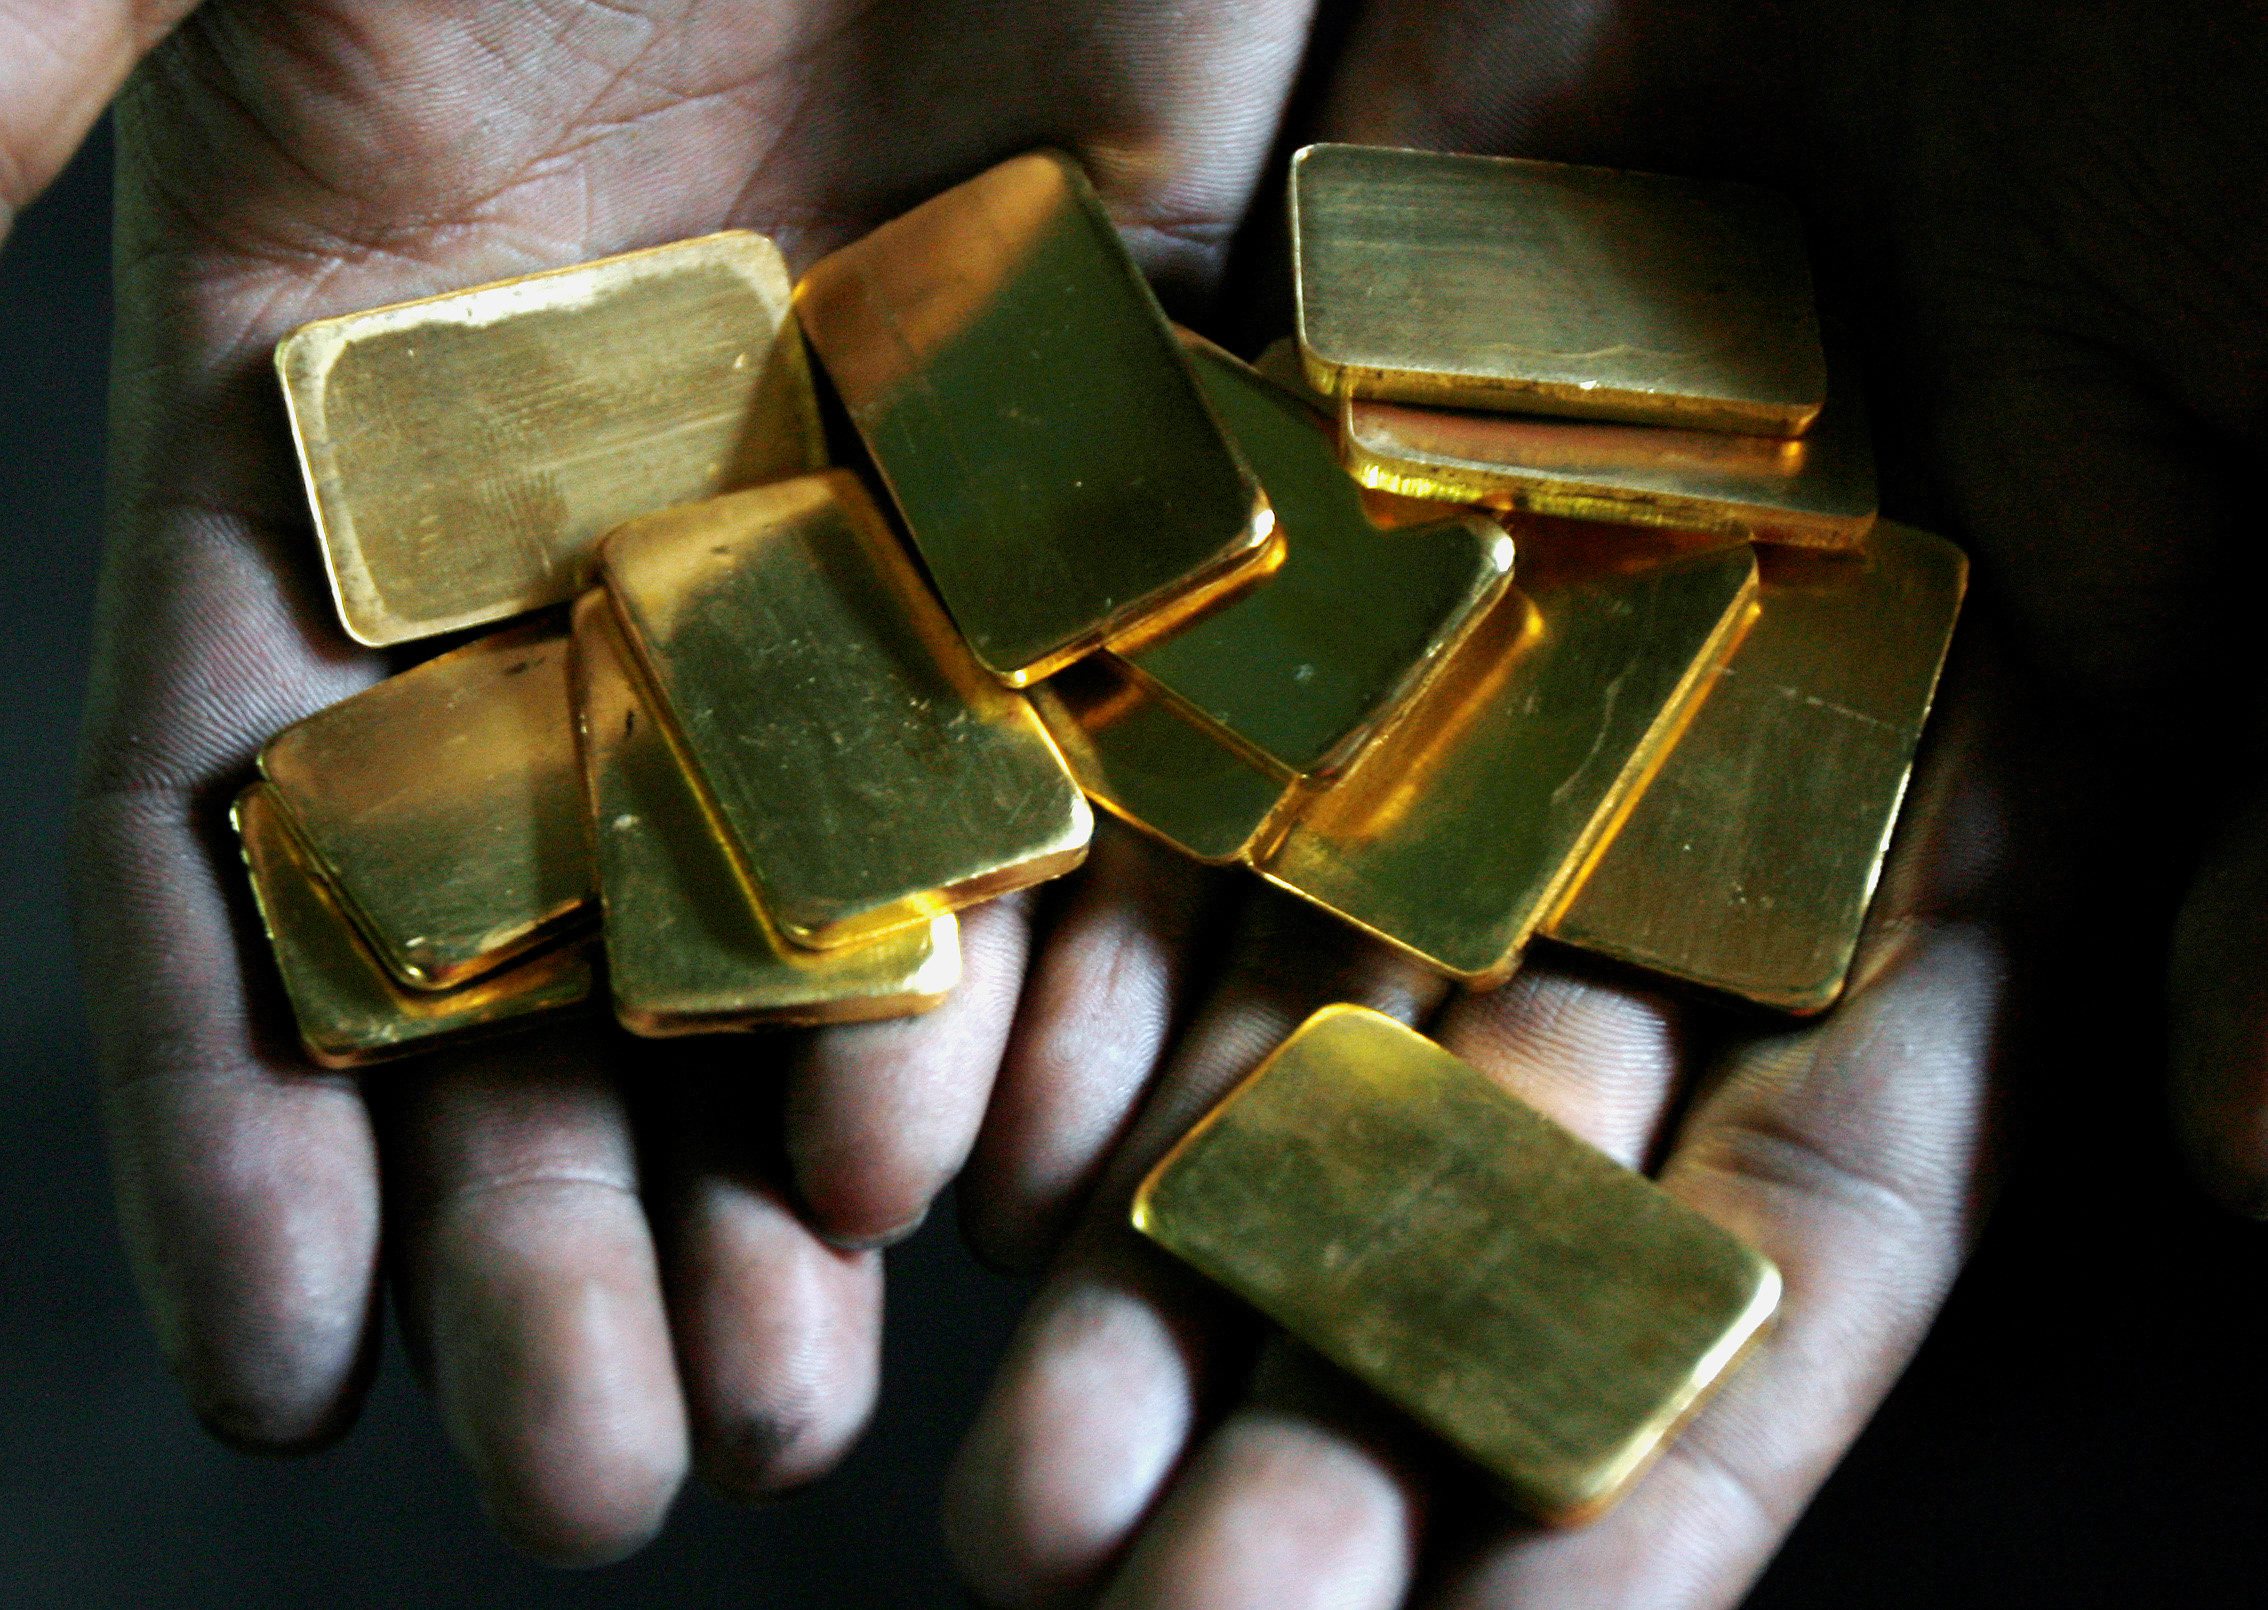 A worker shows gold biscuits at a precious metals refinery in Mumbai